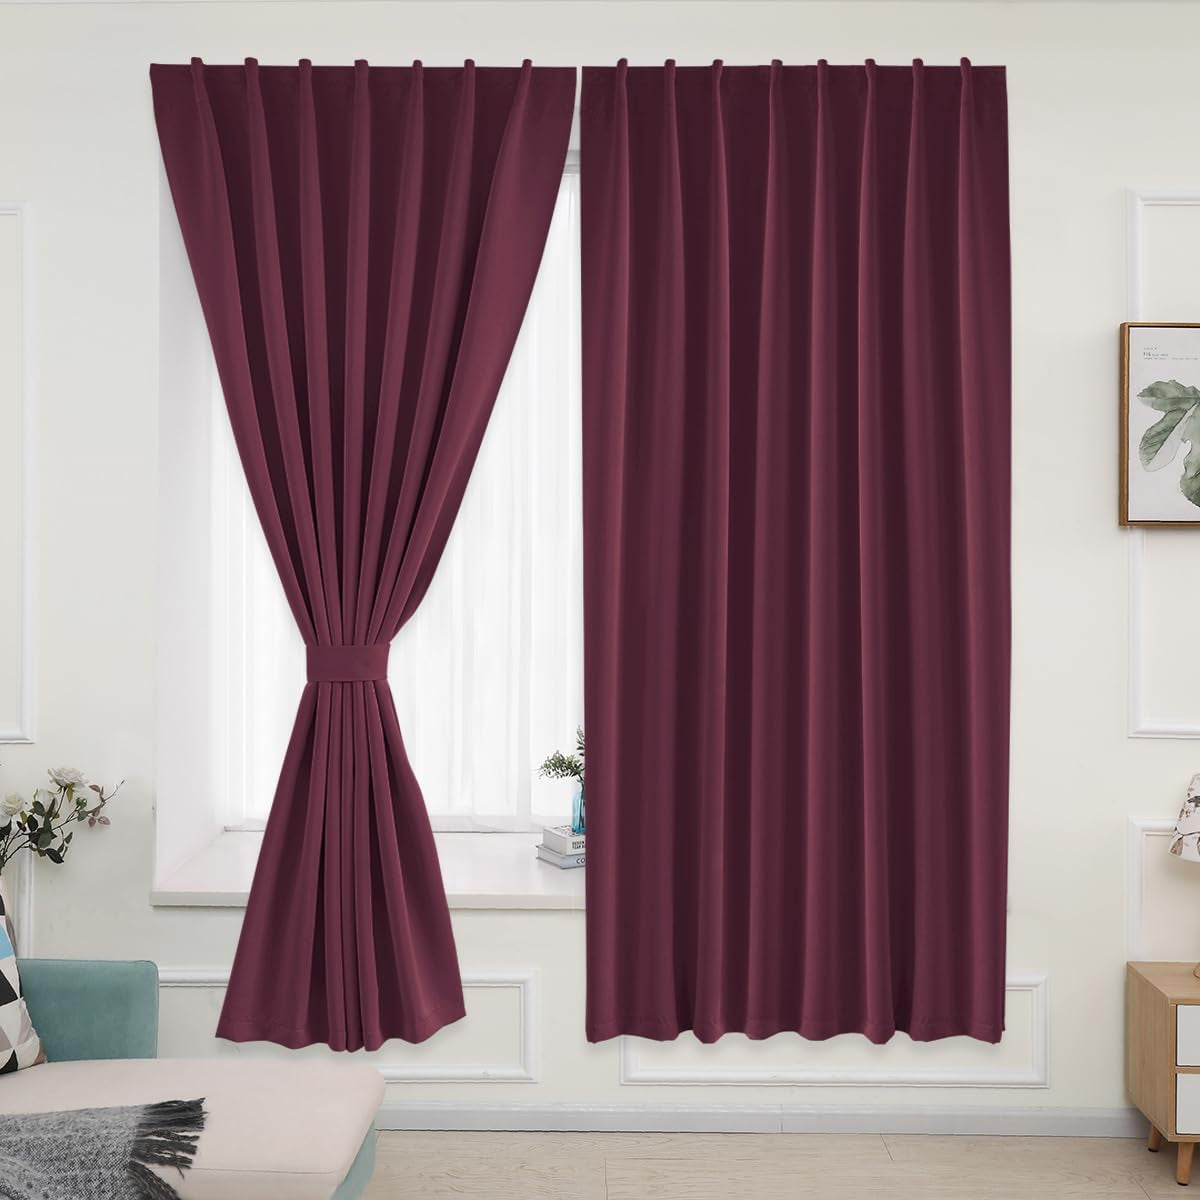 Muamar 2Pcs Blackout Curtains Privacy Curtains 63 Inch Length Window Curtains,Easy Install Thermal Insulated Window Shades,Stick Curtains No Rods, Black 42" W X 63" L  Muamar Wine 52"W X 84"L 